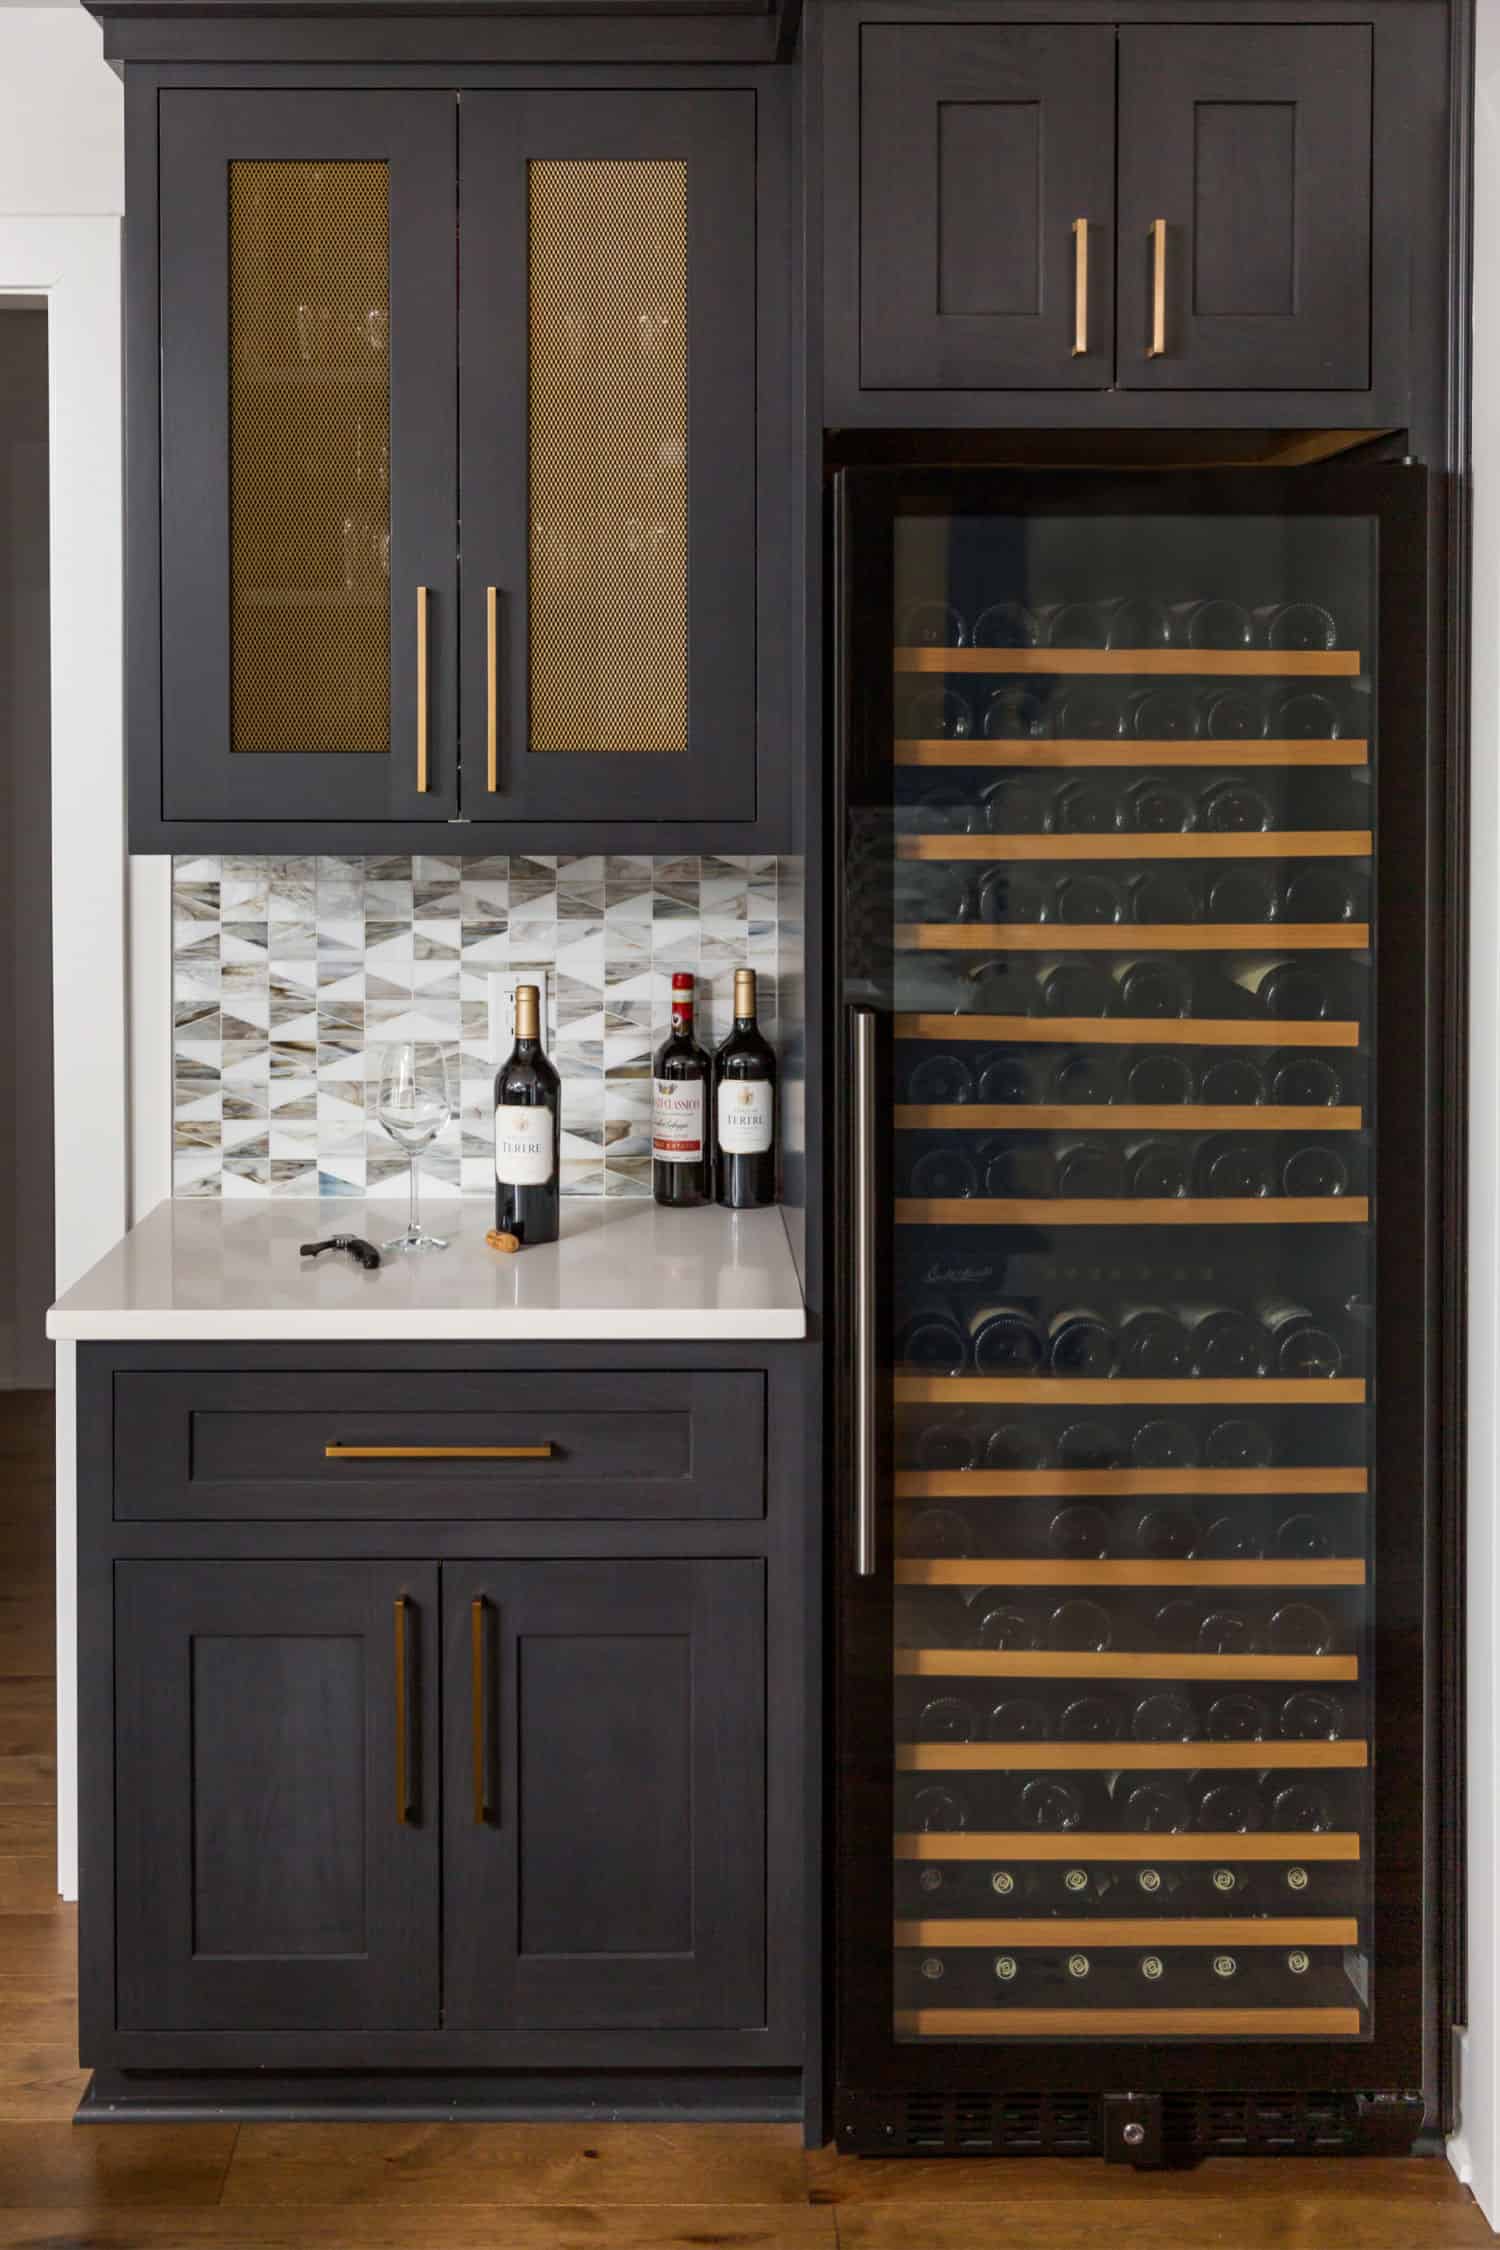 Nicholas Design Build | A remodelled kitchen with a sleek wine cooler and black cabinets.